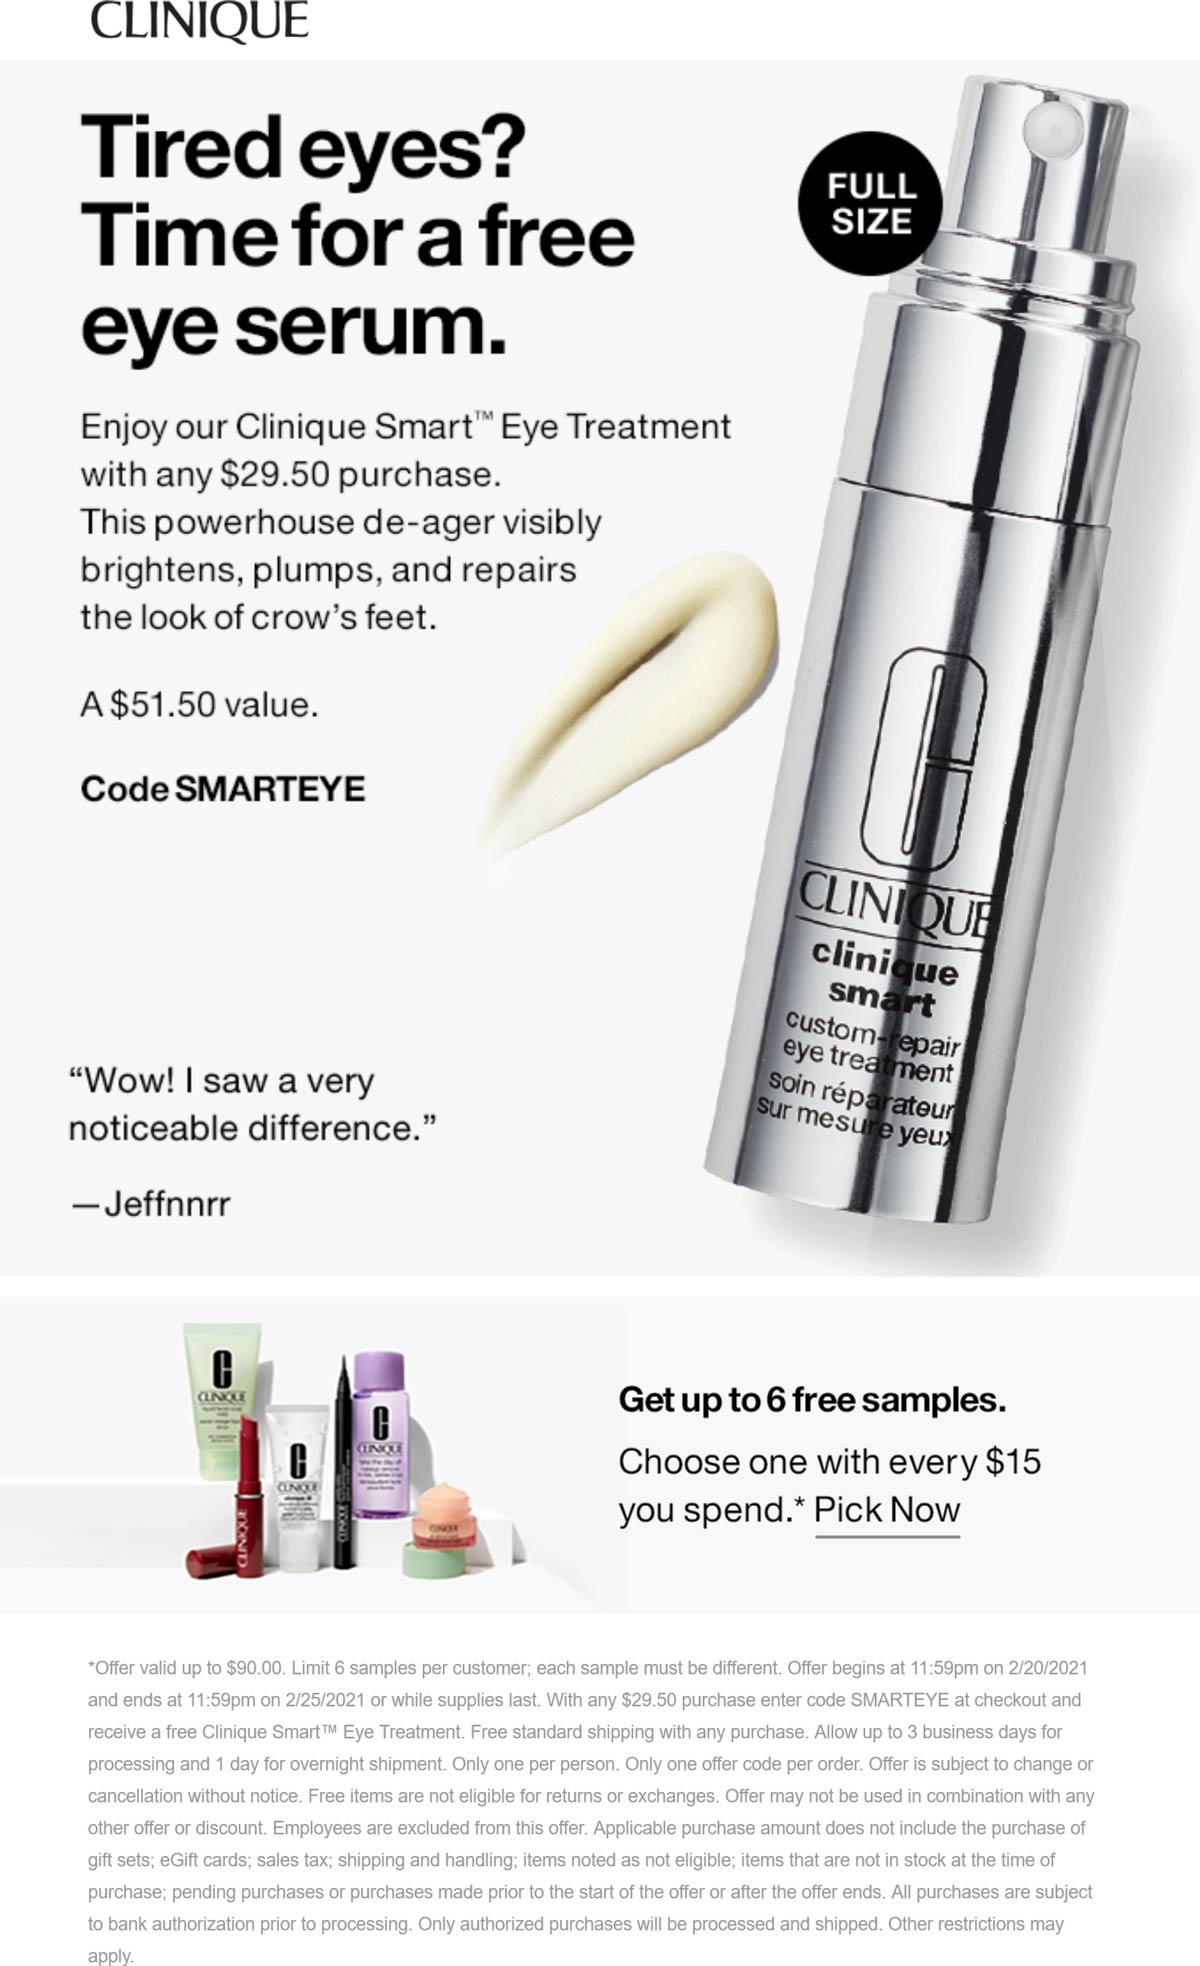 Free 50 full size eye treatment with 30 spent today at Clinique via